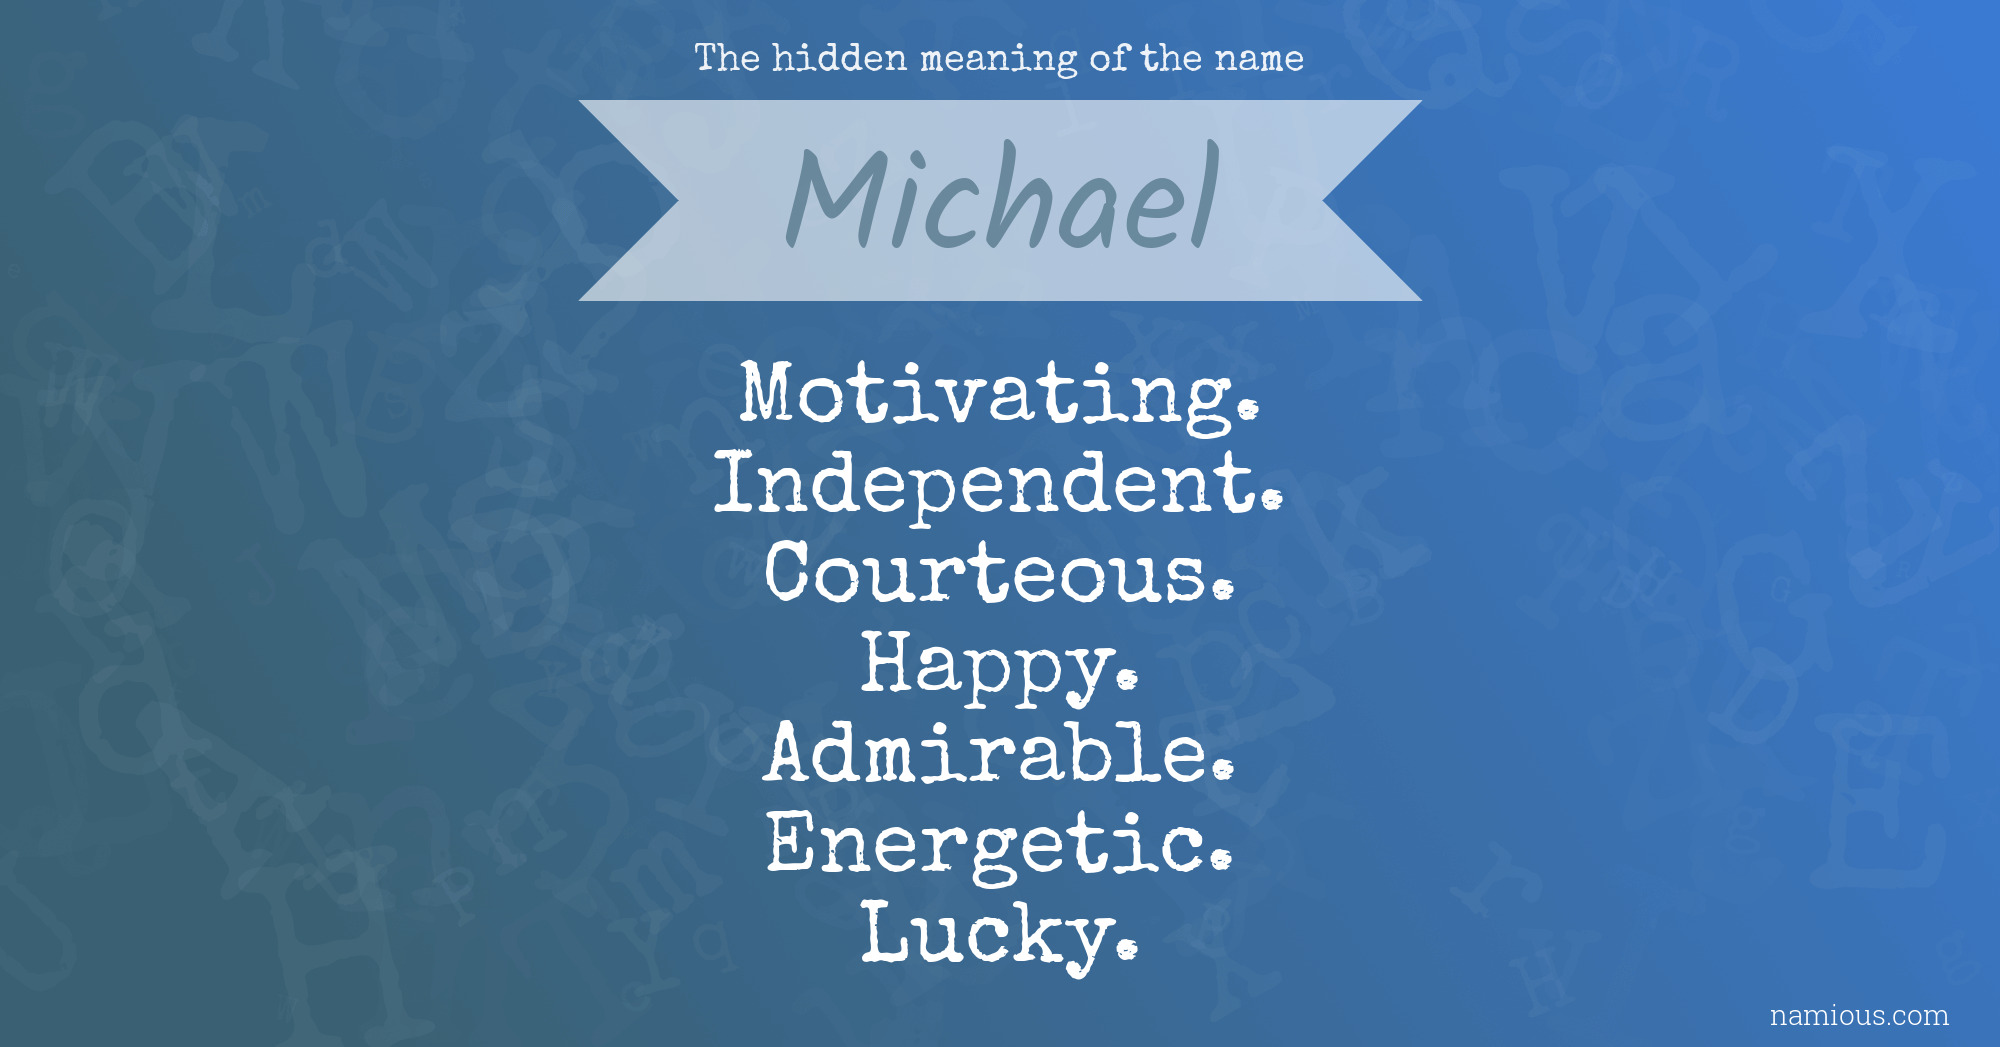 The hidden meaning of the name Michael